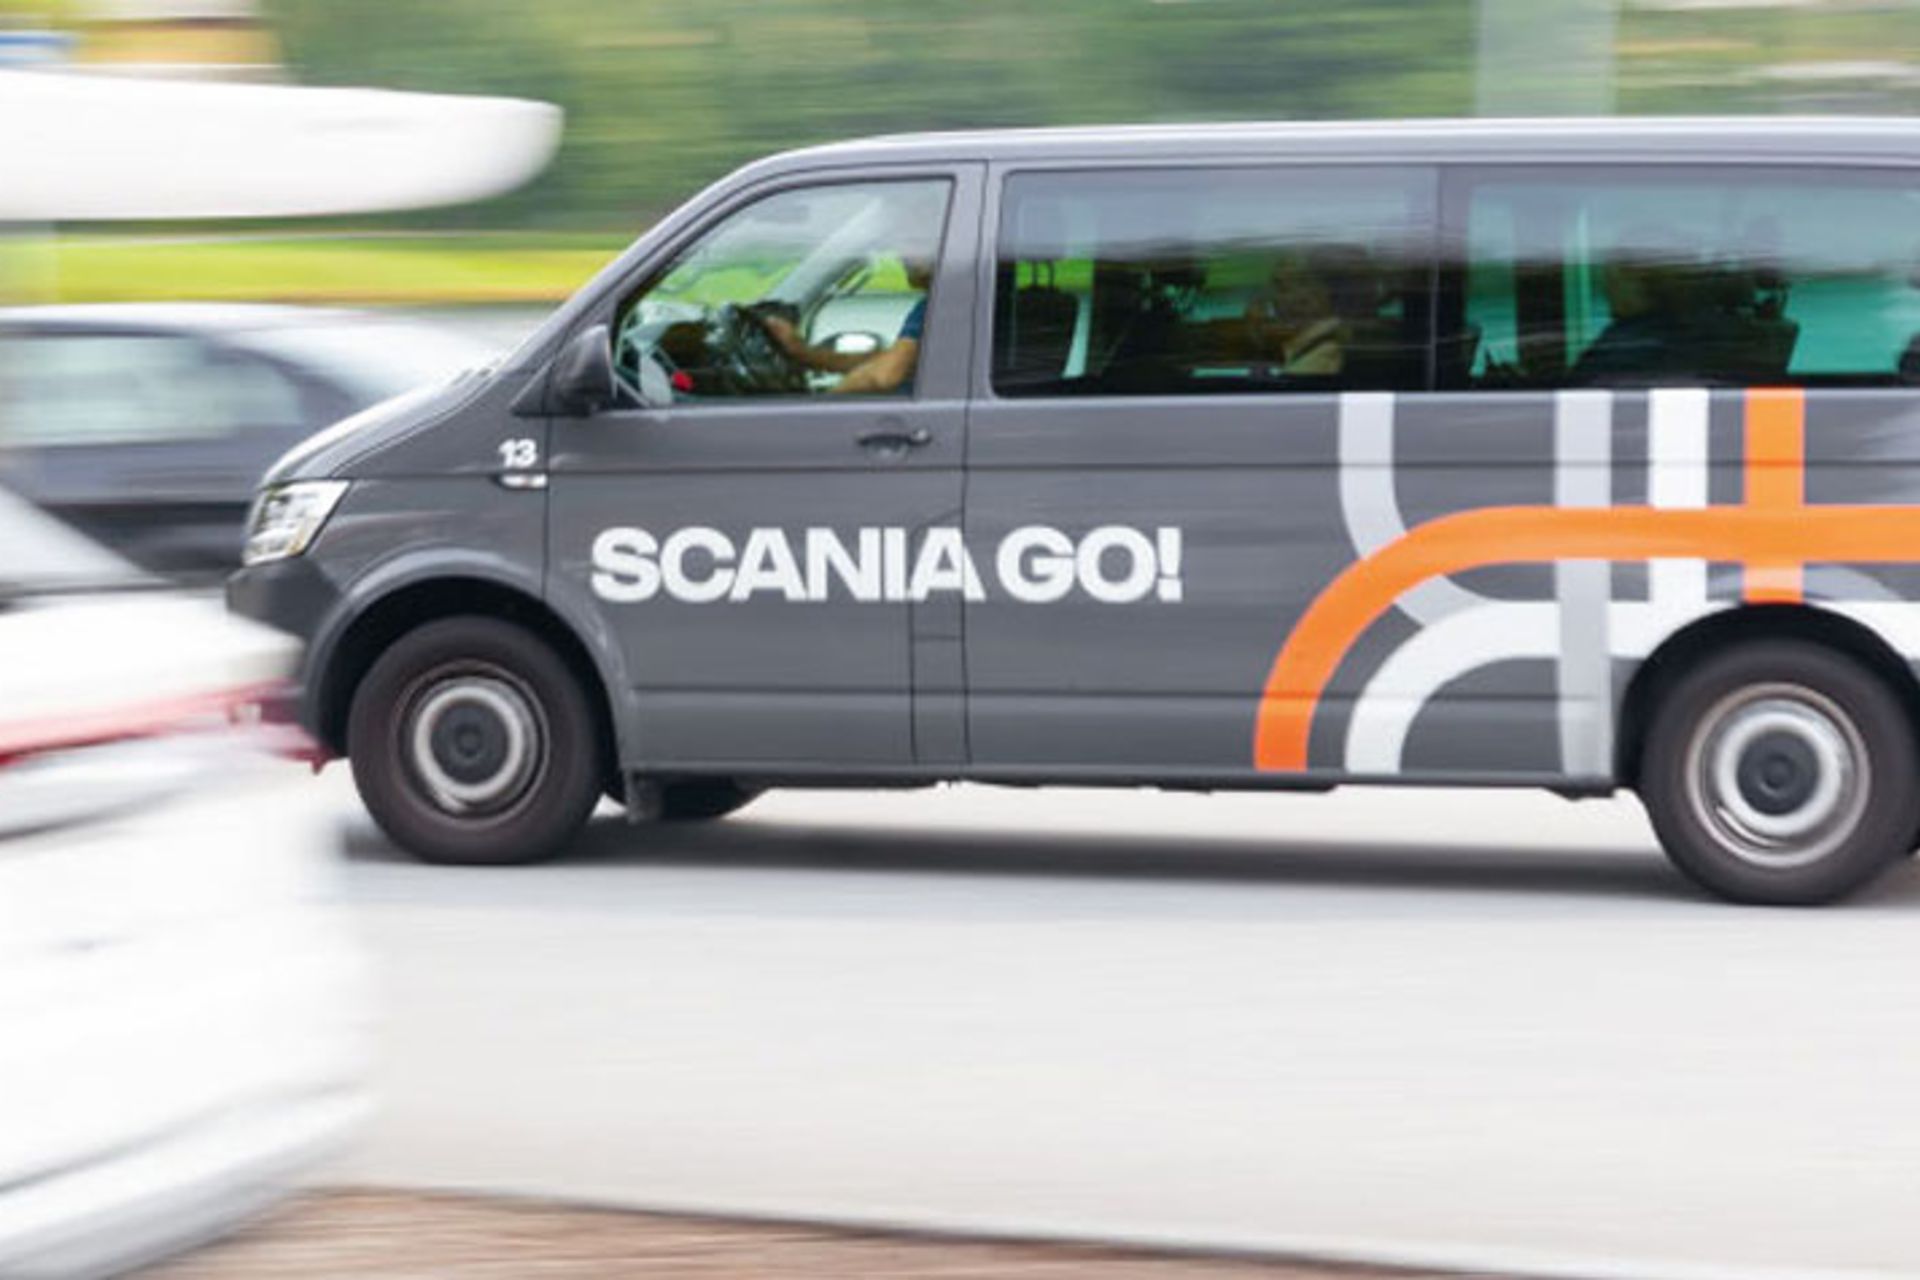 Employees at the Scania's campus in Södertälje are testing the sustainable mobility service Scania Go in real-life operation.